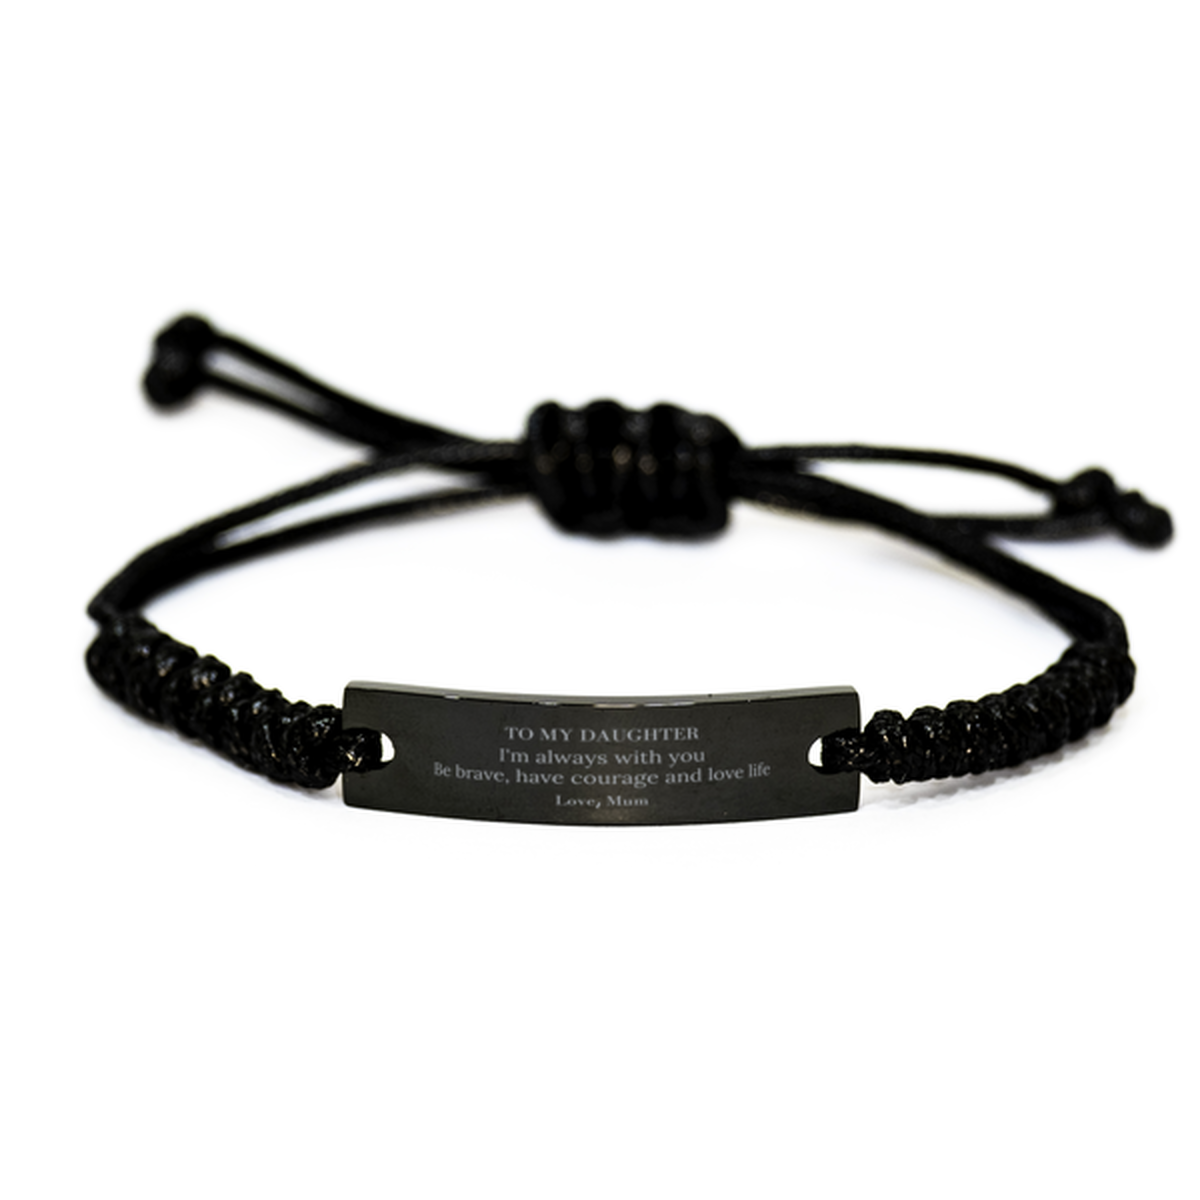 To My Daughter Gifts from Mum, Unique Black Rope Bracelet Inspirational Christmas Birthday Graduation Gifts for Daughter I'm always with you. Be brave, have courage and love life. Love, Mum